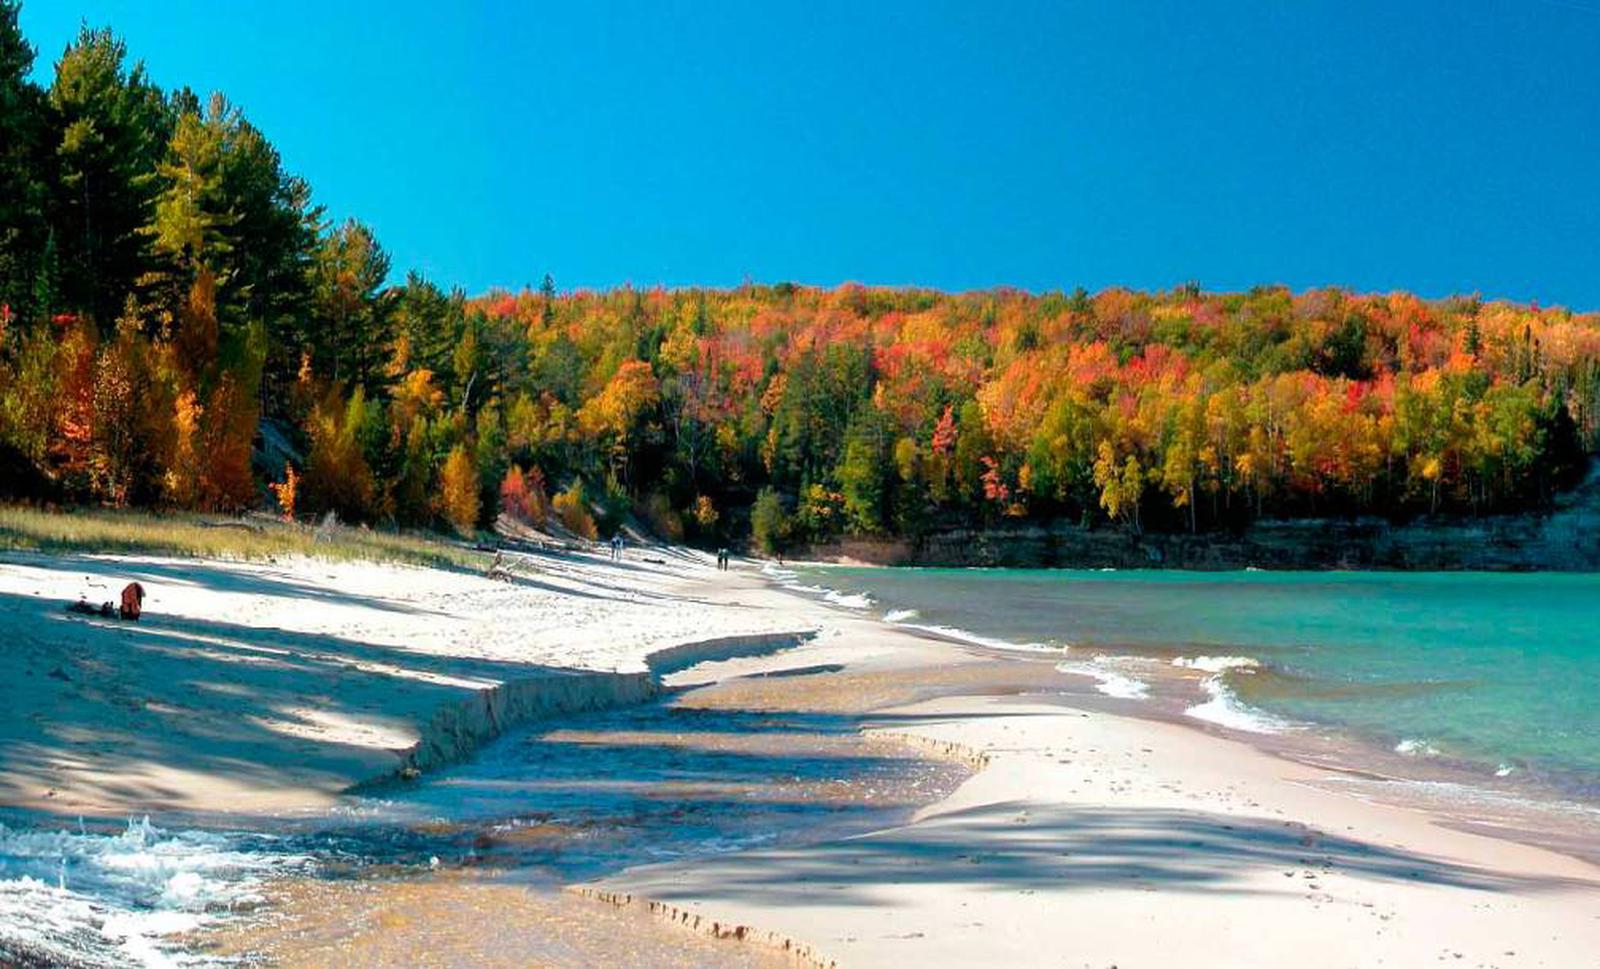 Chapel Beach in the FallPictured Rocks National Lakeshore Backcountry Camping PermitChapel Beach in the Fall